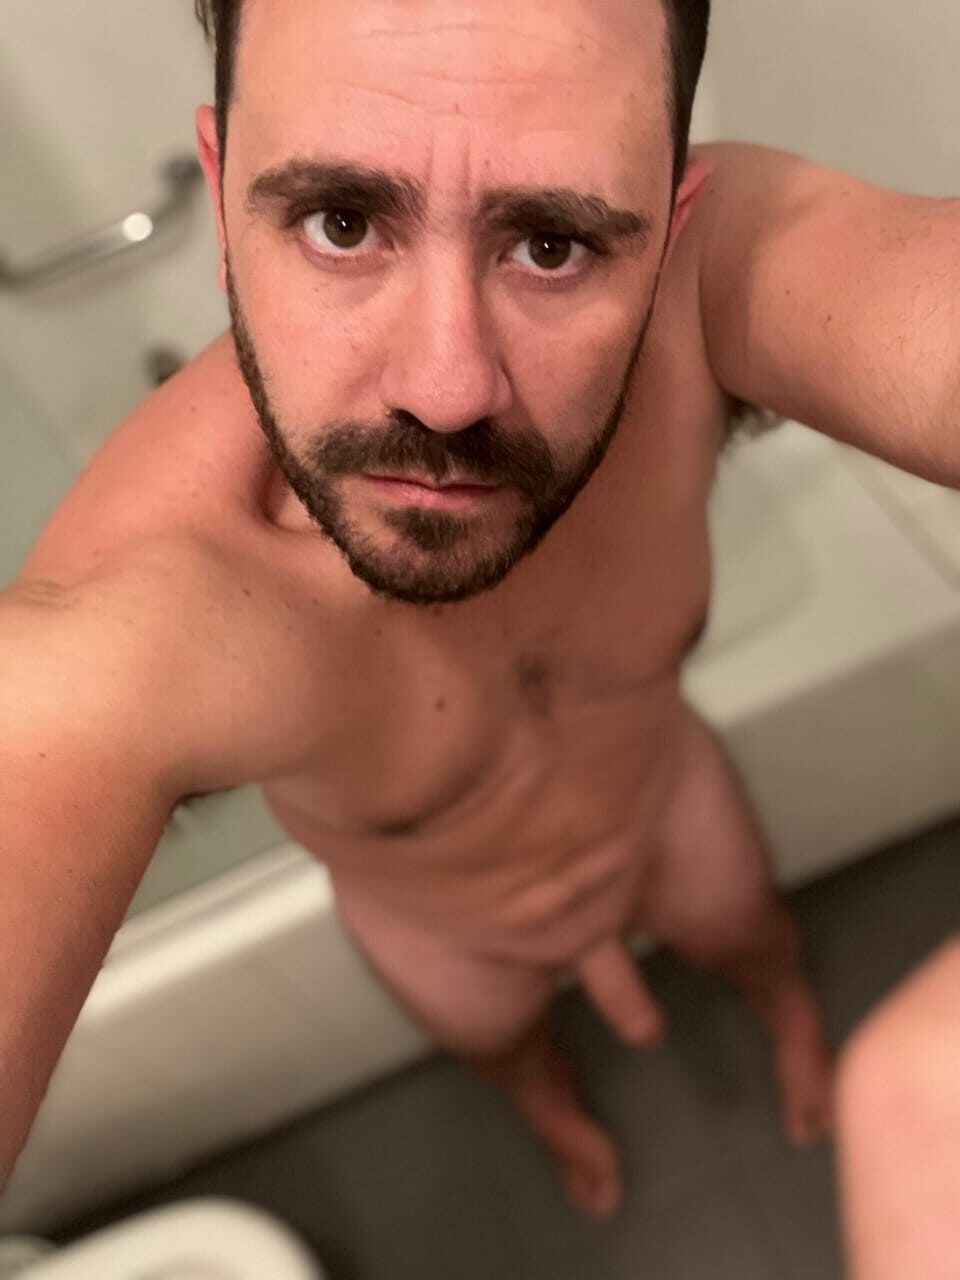  Naked in the bathroom